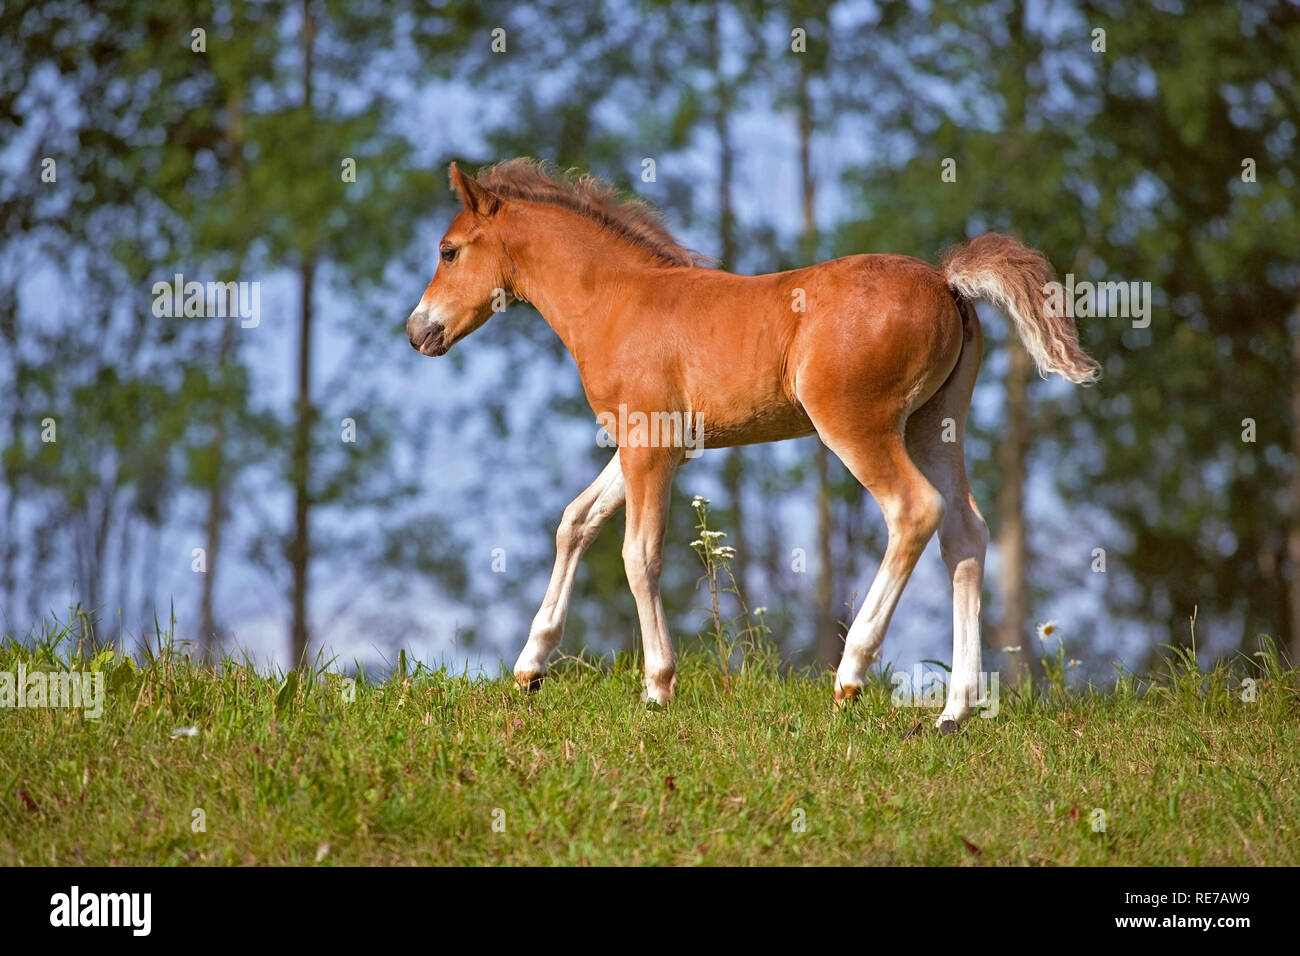 Cute few week old Welsh Pony Colt walking on meadow with lush green trees in background. Stock Photo